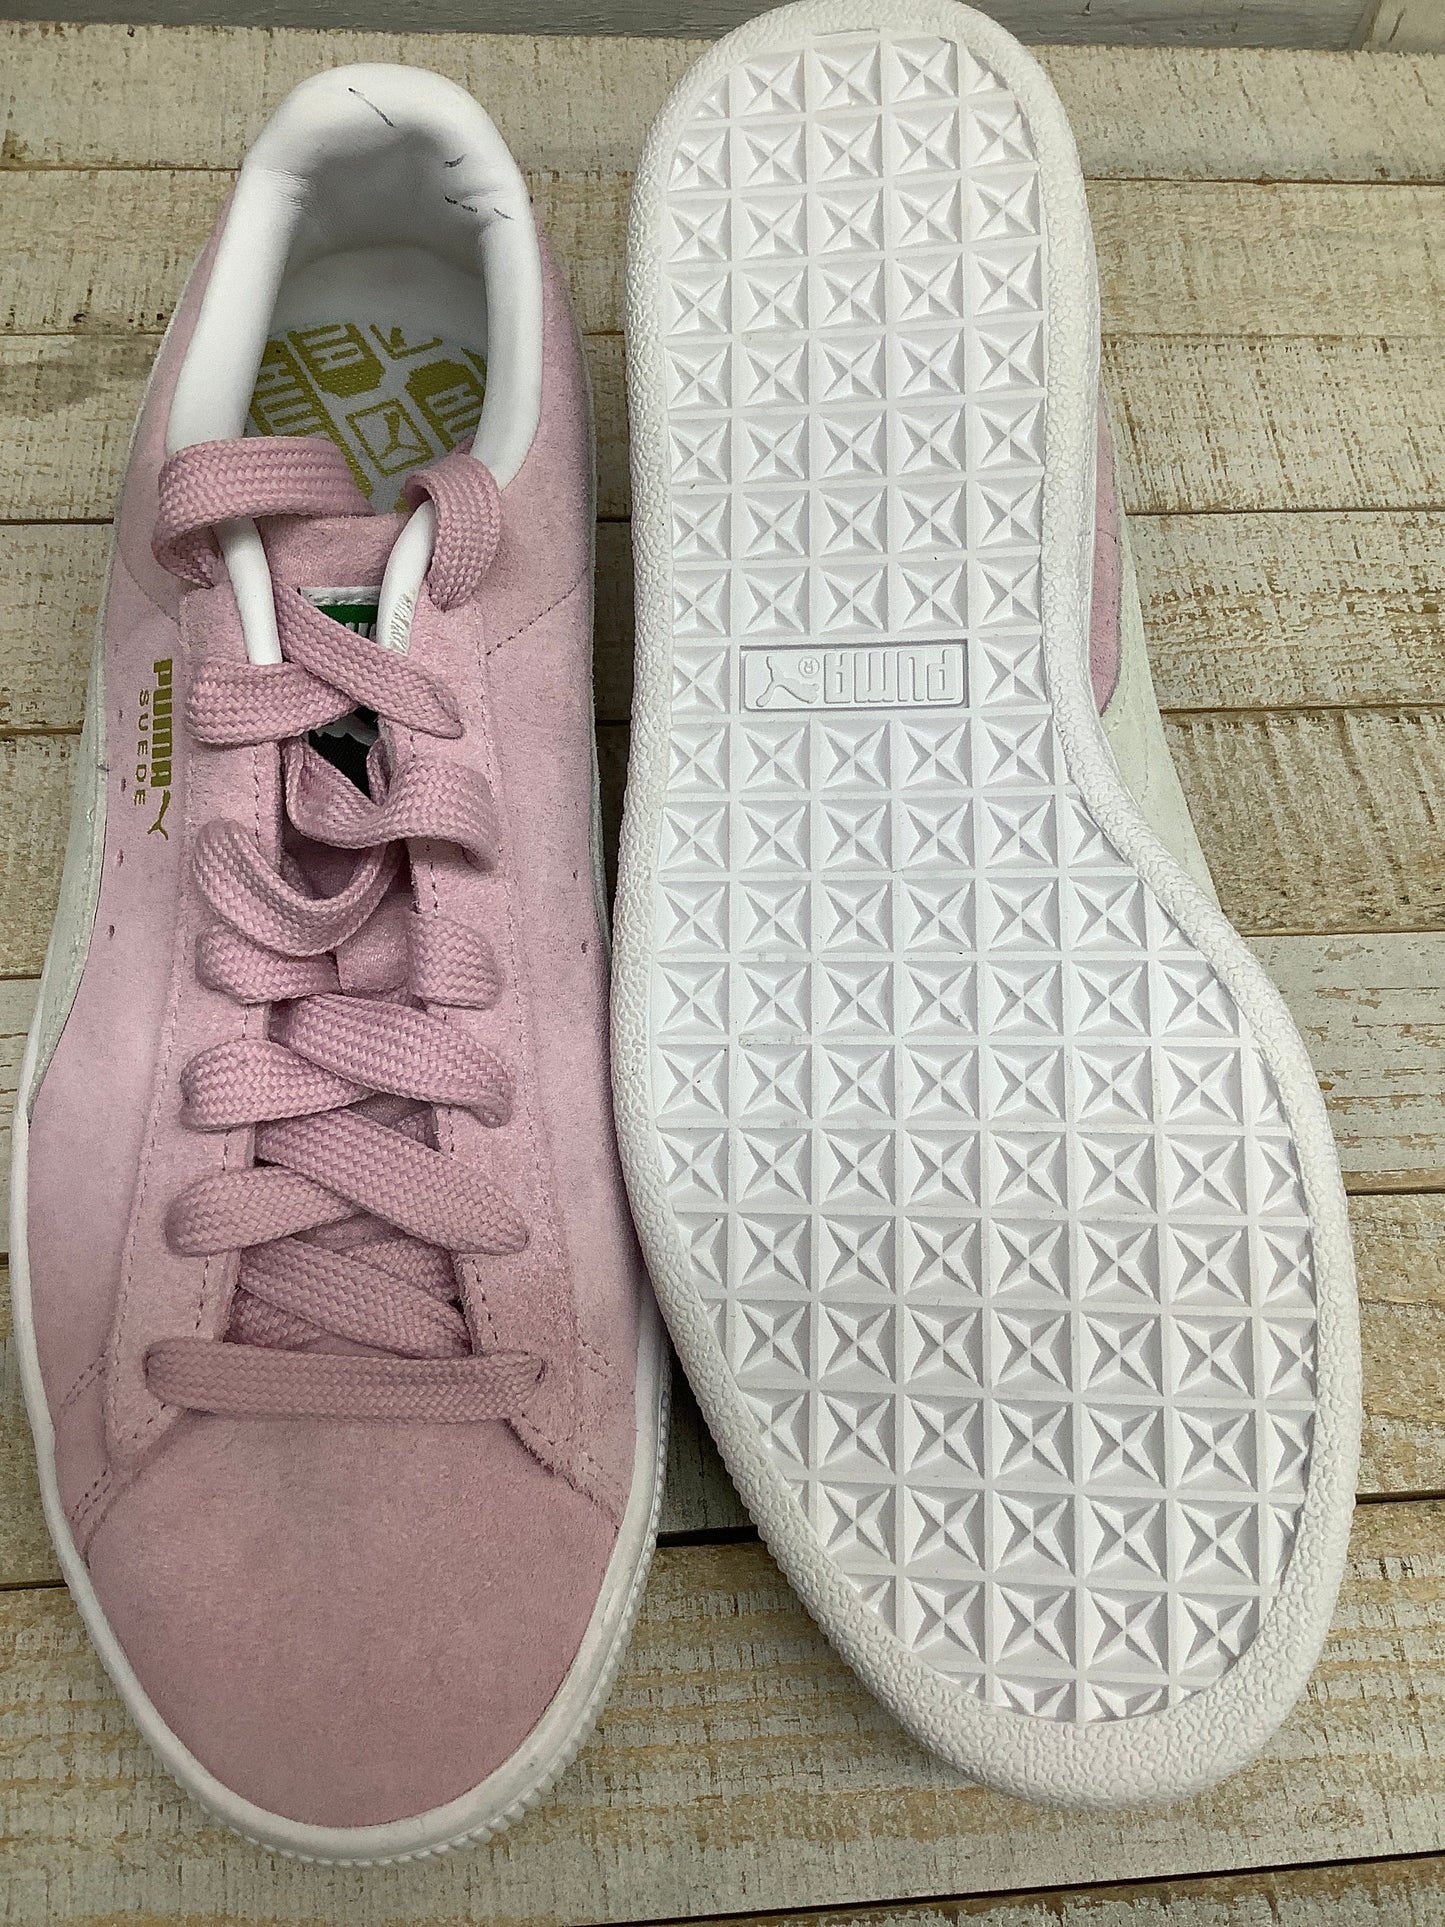 Pink Shoes Sneakers Puma, Size 7